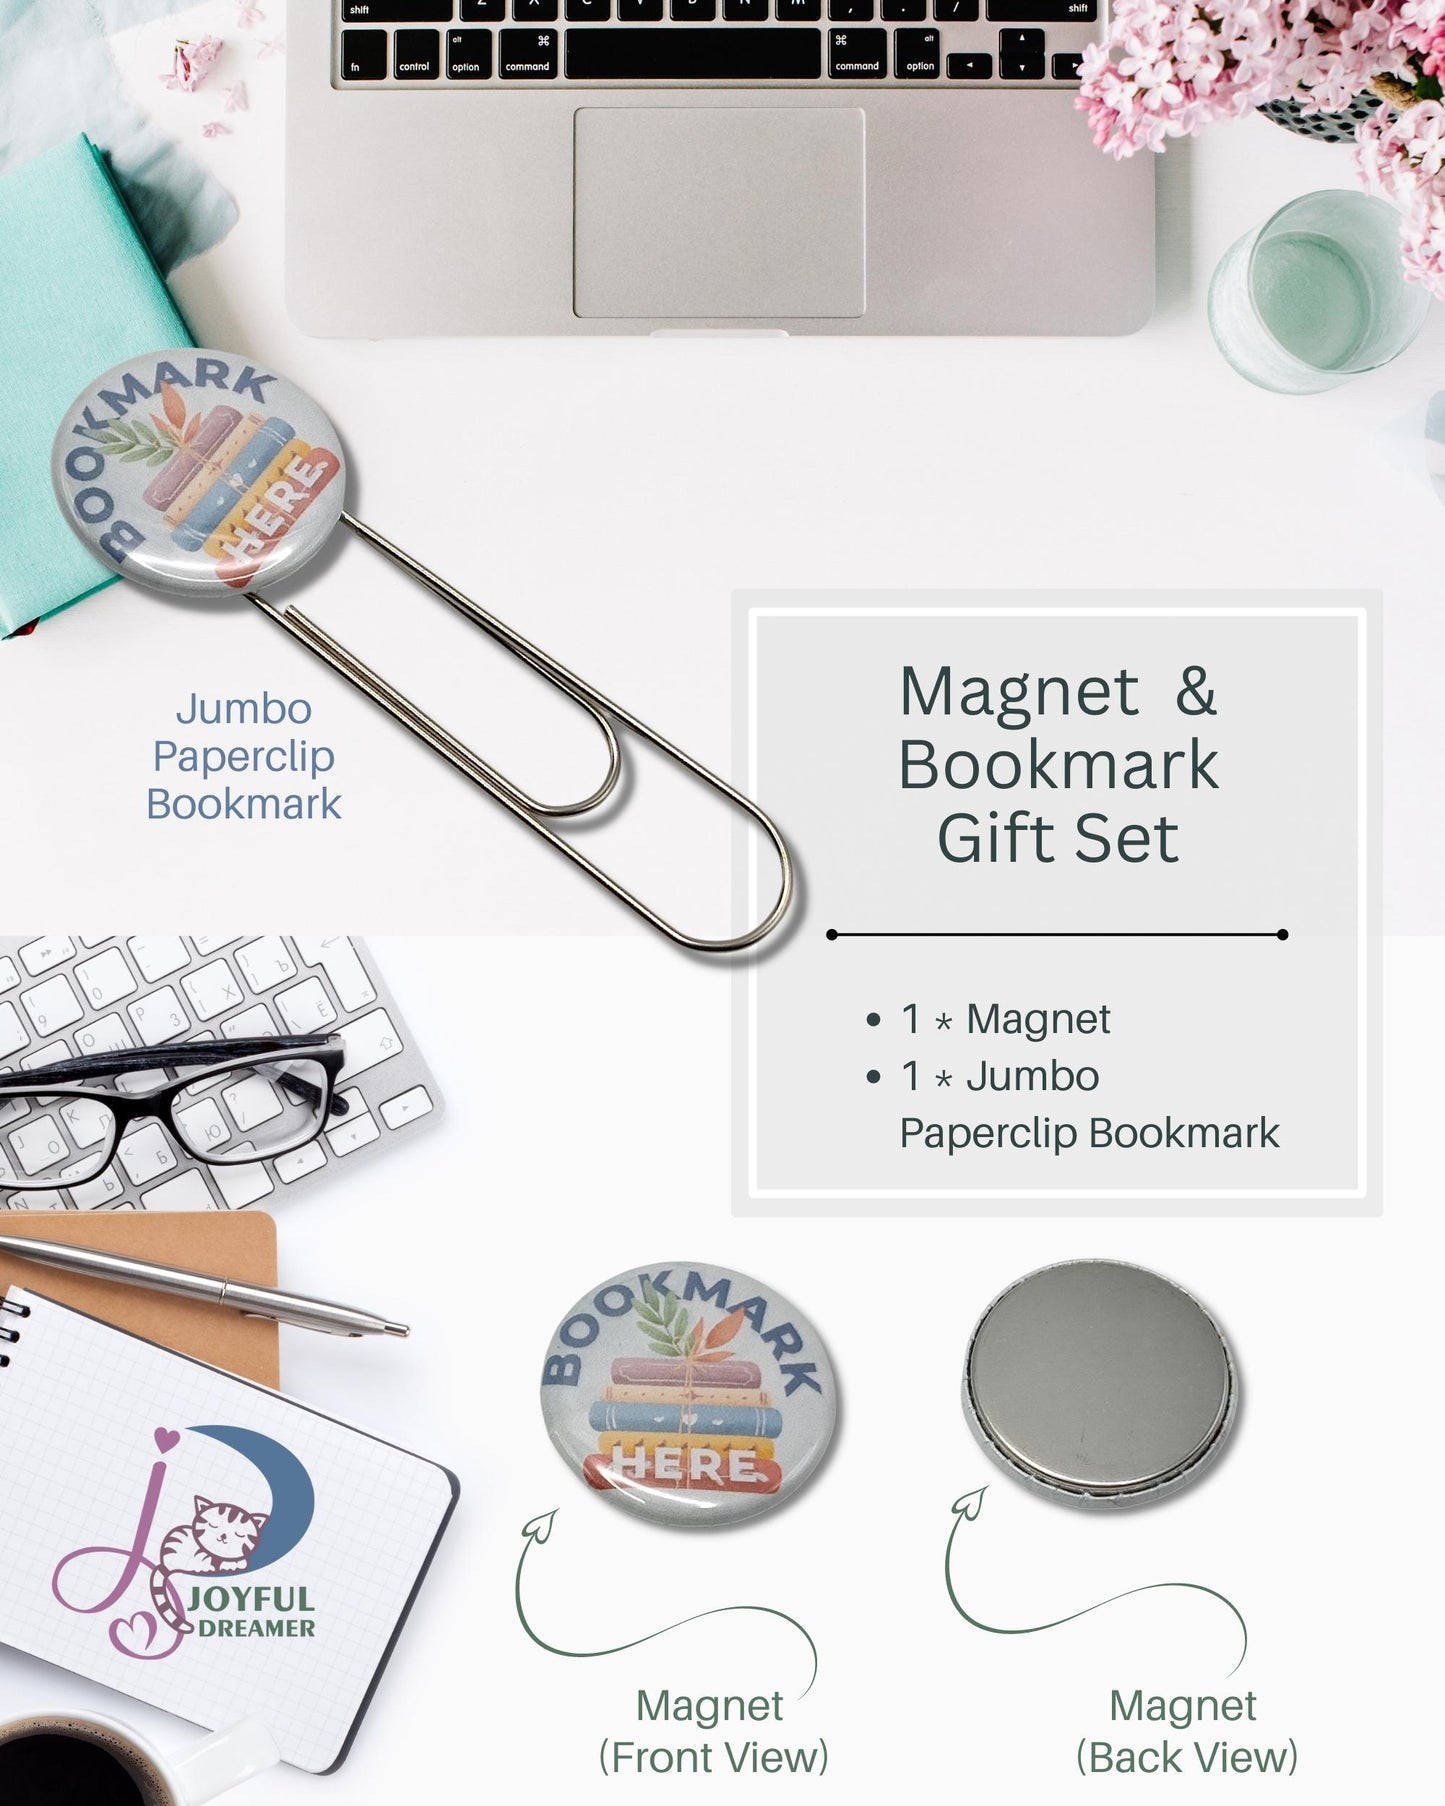 Gift Set | Jumbo Paperclip Bookmark and White Board Magnet